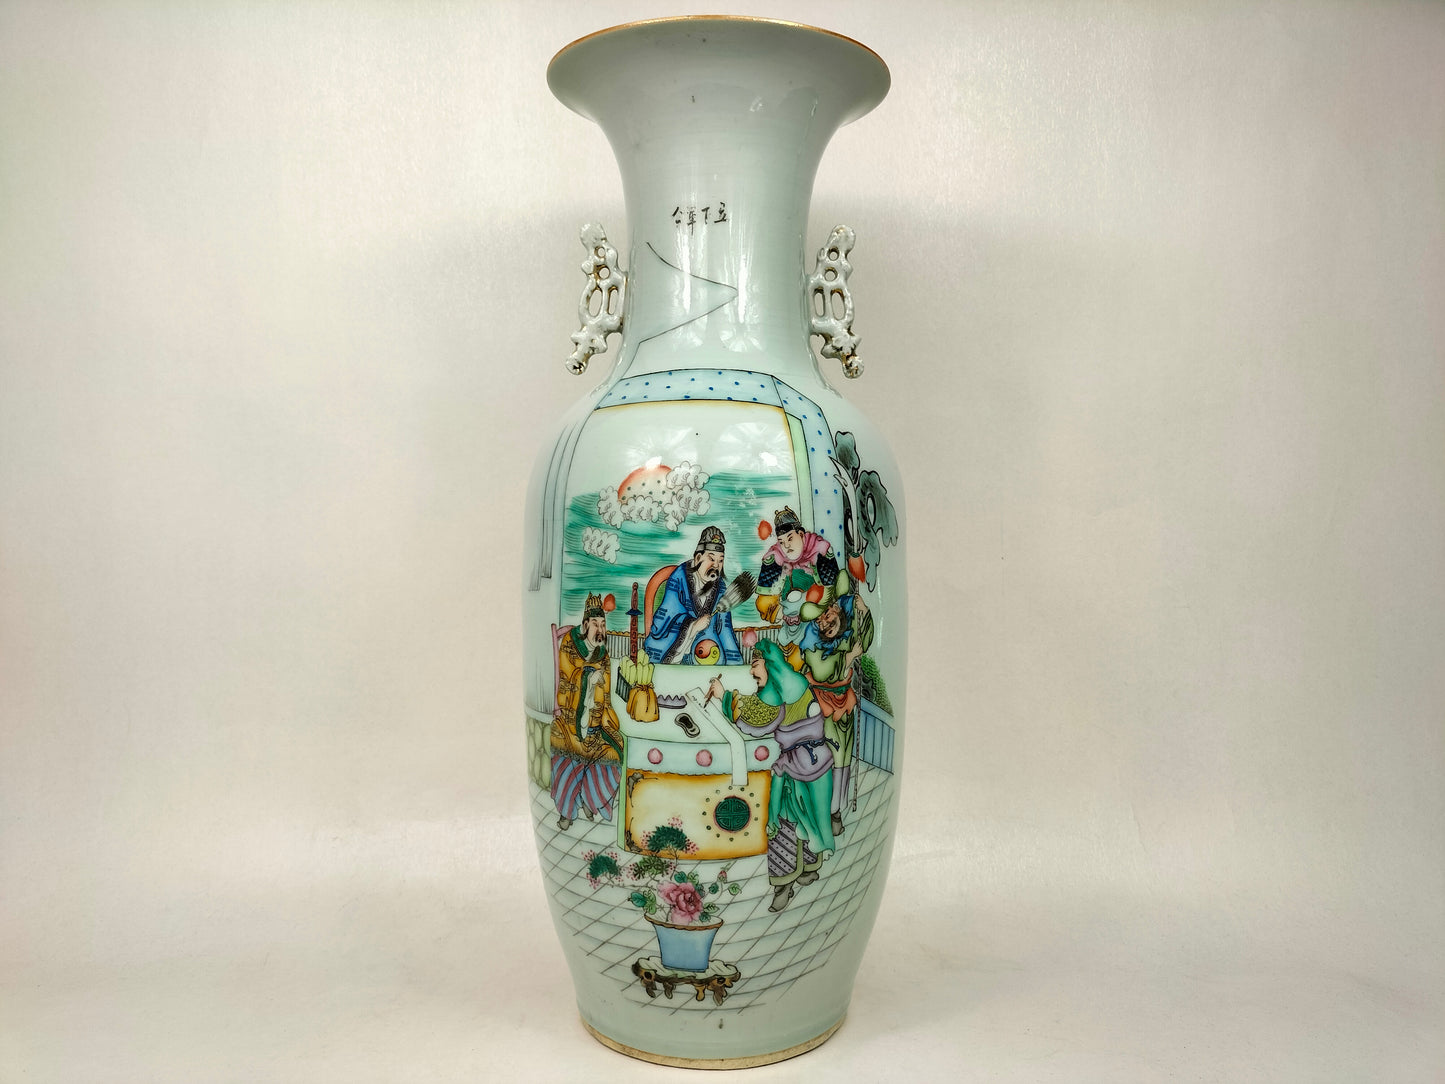 Large antique Chinese ROC vase with emperor scene and poem